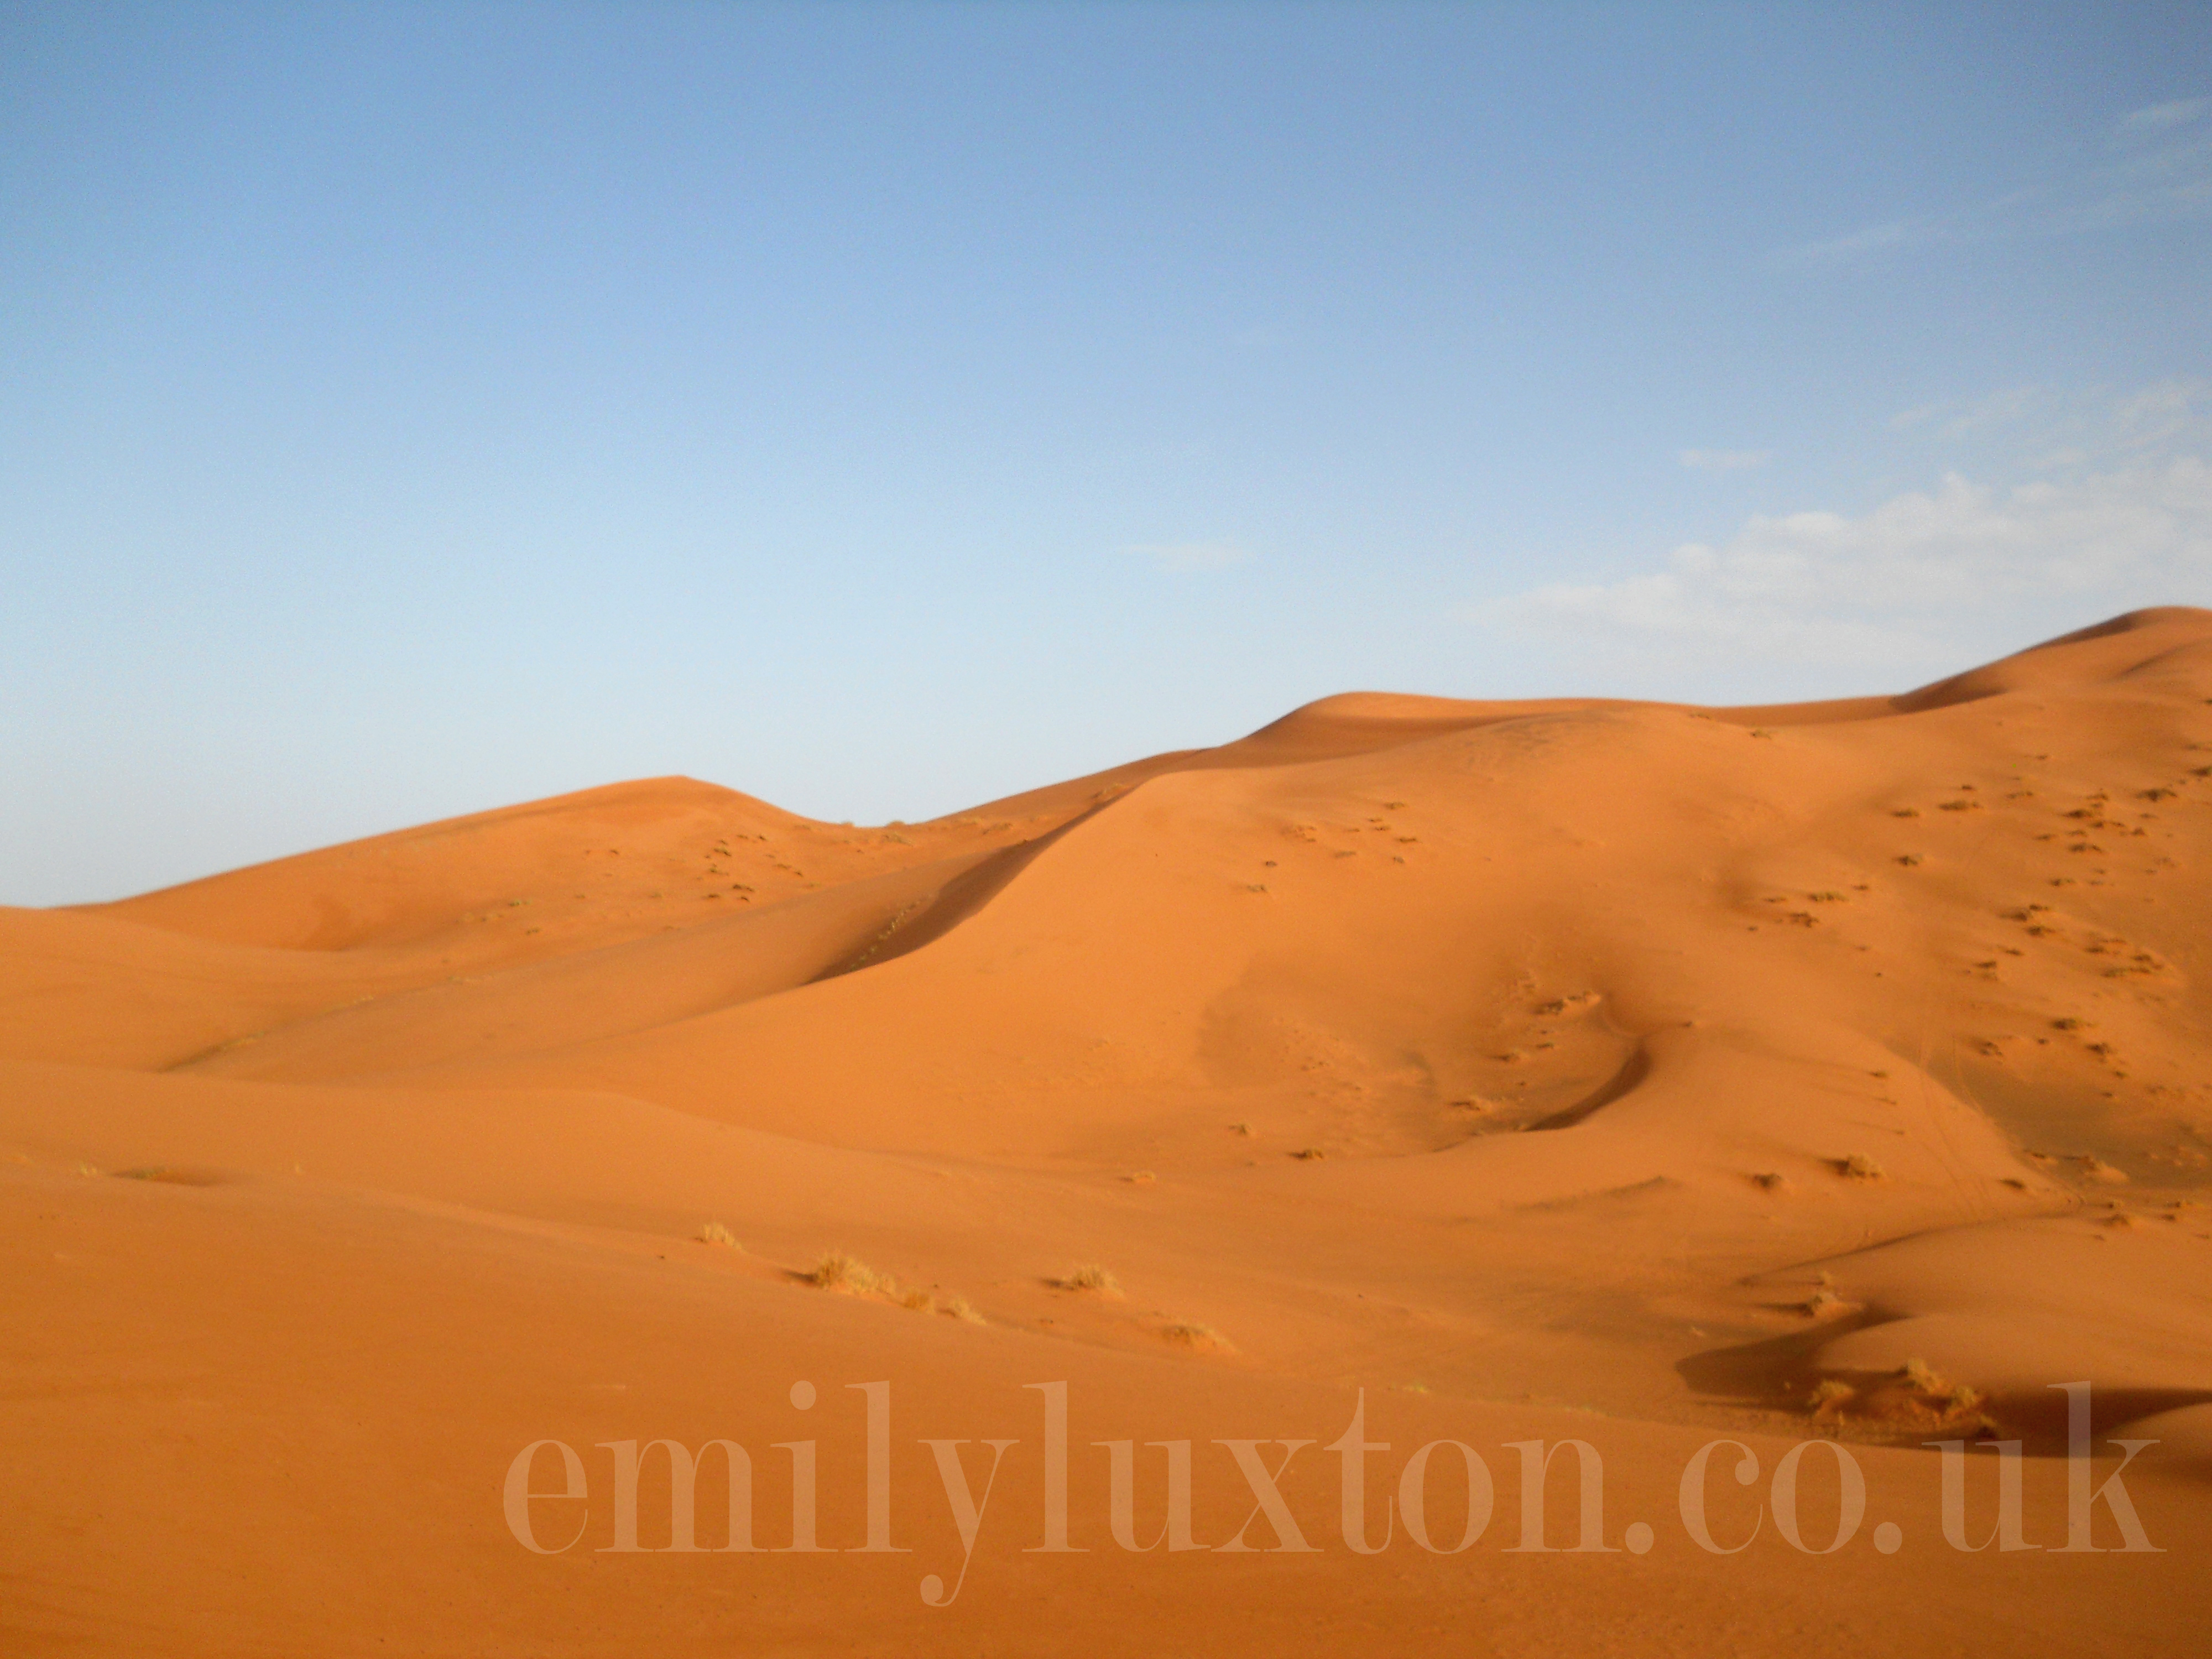 Camel Trek and Camping in Merzouga, Morocco